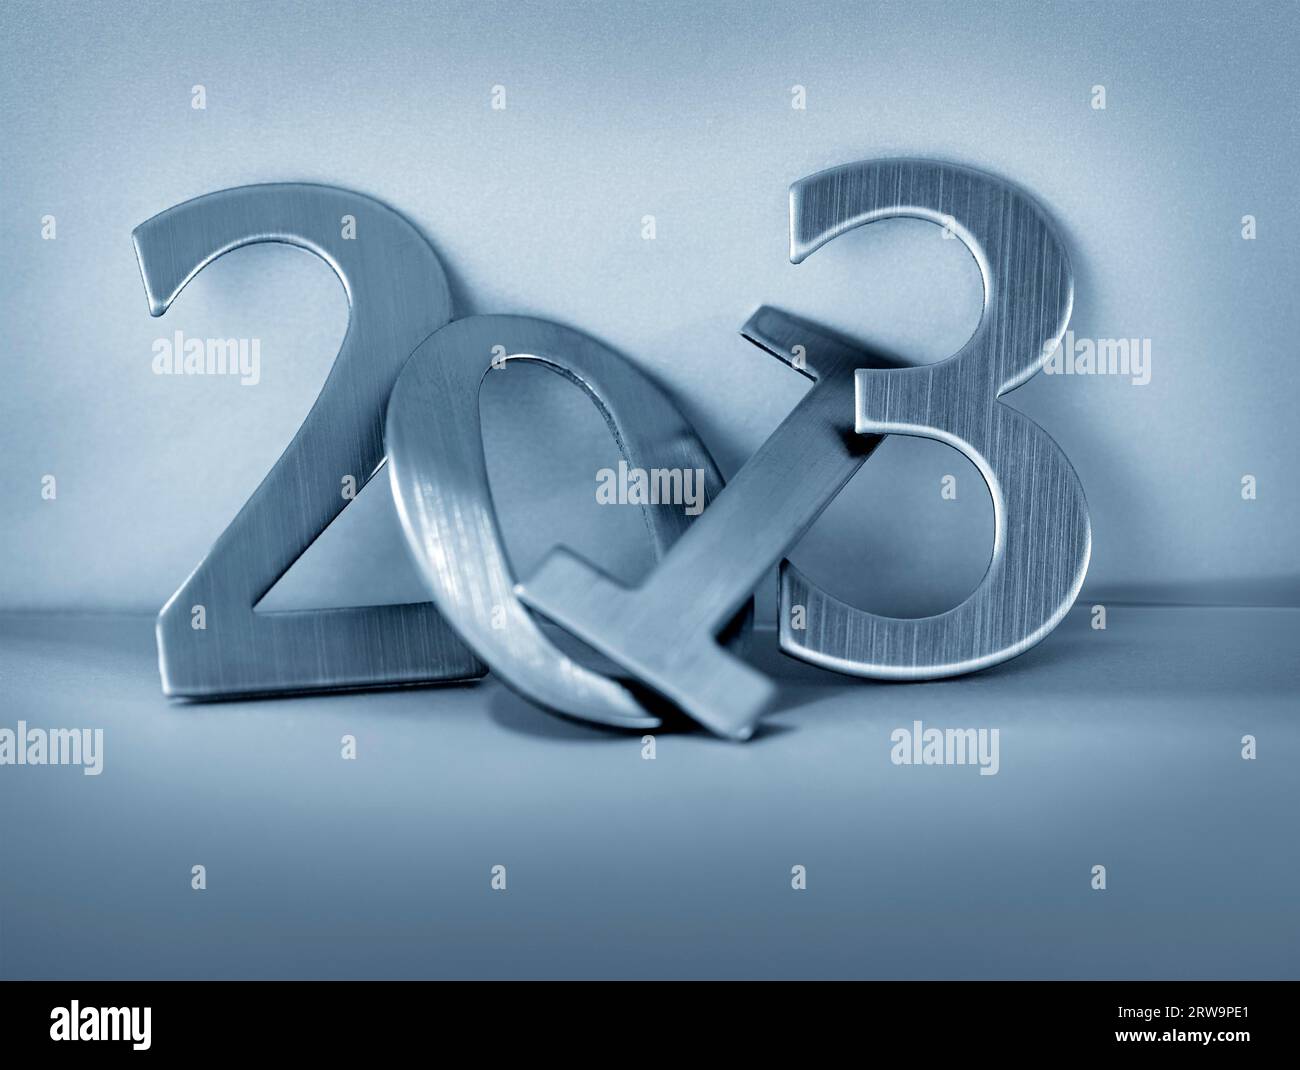 Metallic numbers for year 2013. Short depth-of-field. Note: the background may appear grainy, that's because it's grainy paper Stock Photo